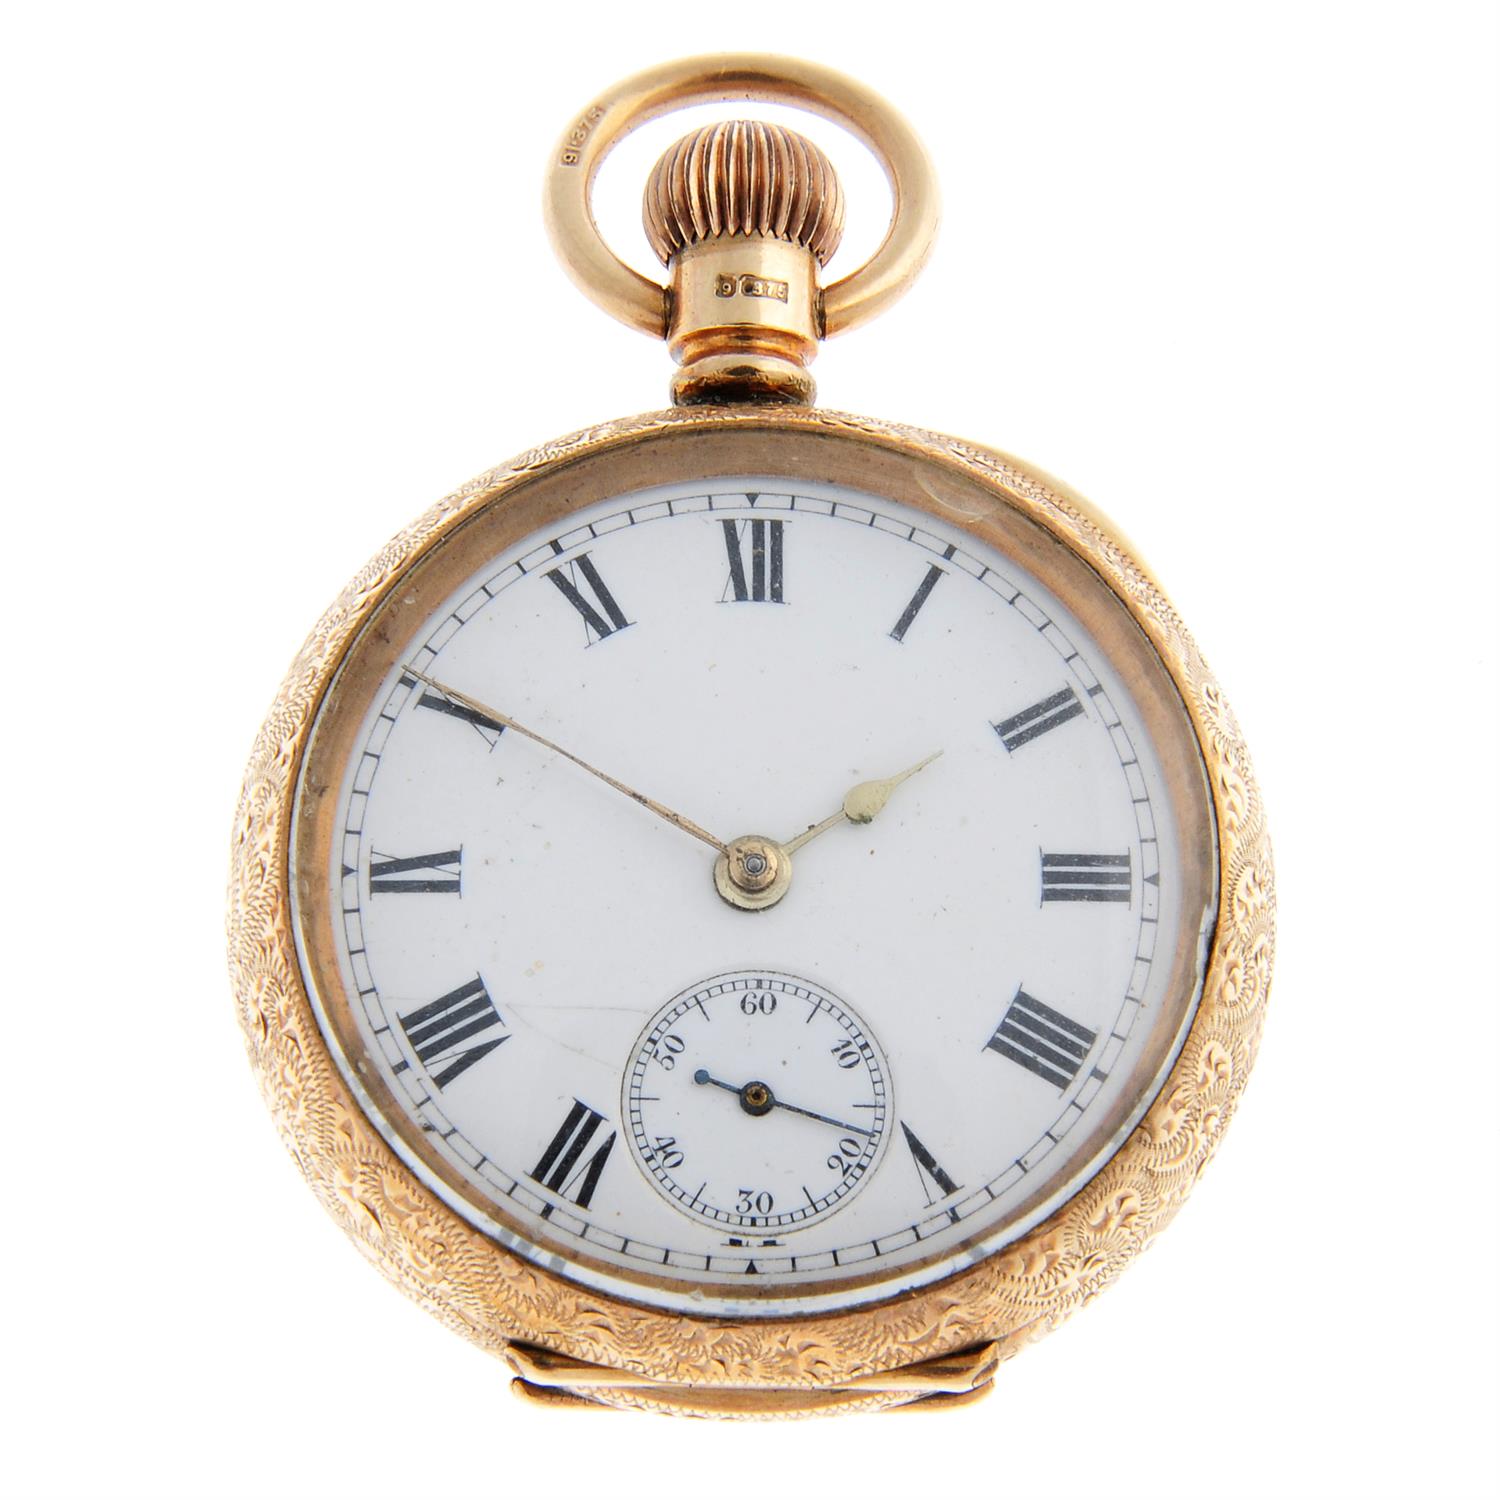 An open face pocket watch by Waltham, 33mm.